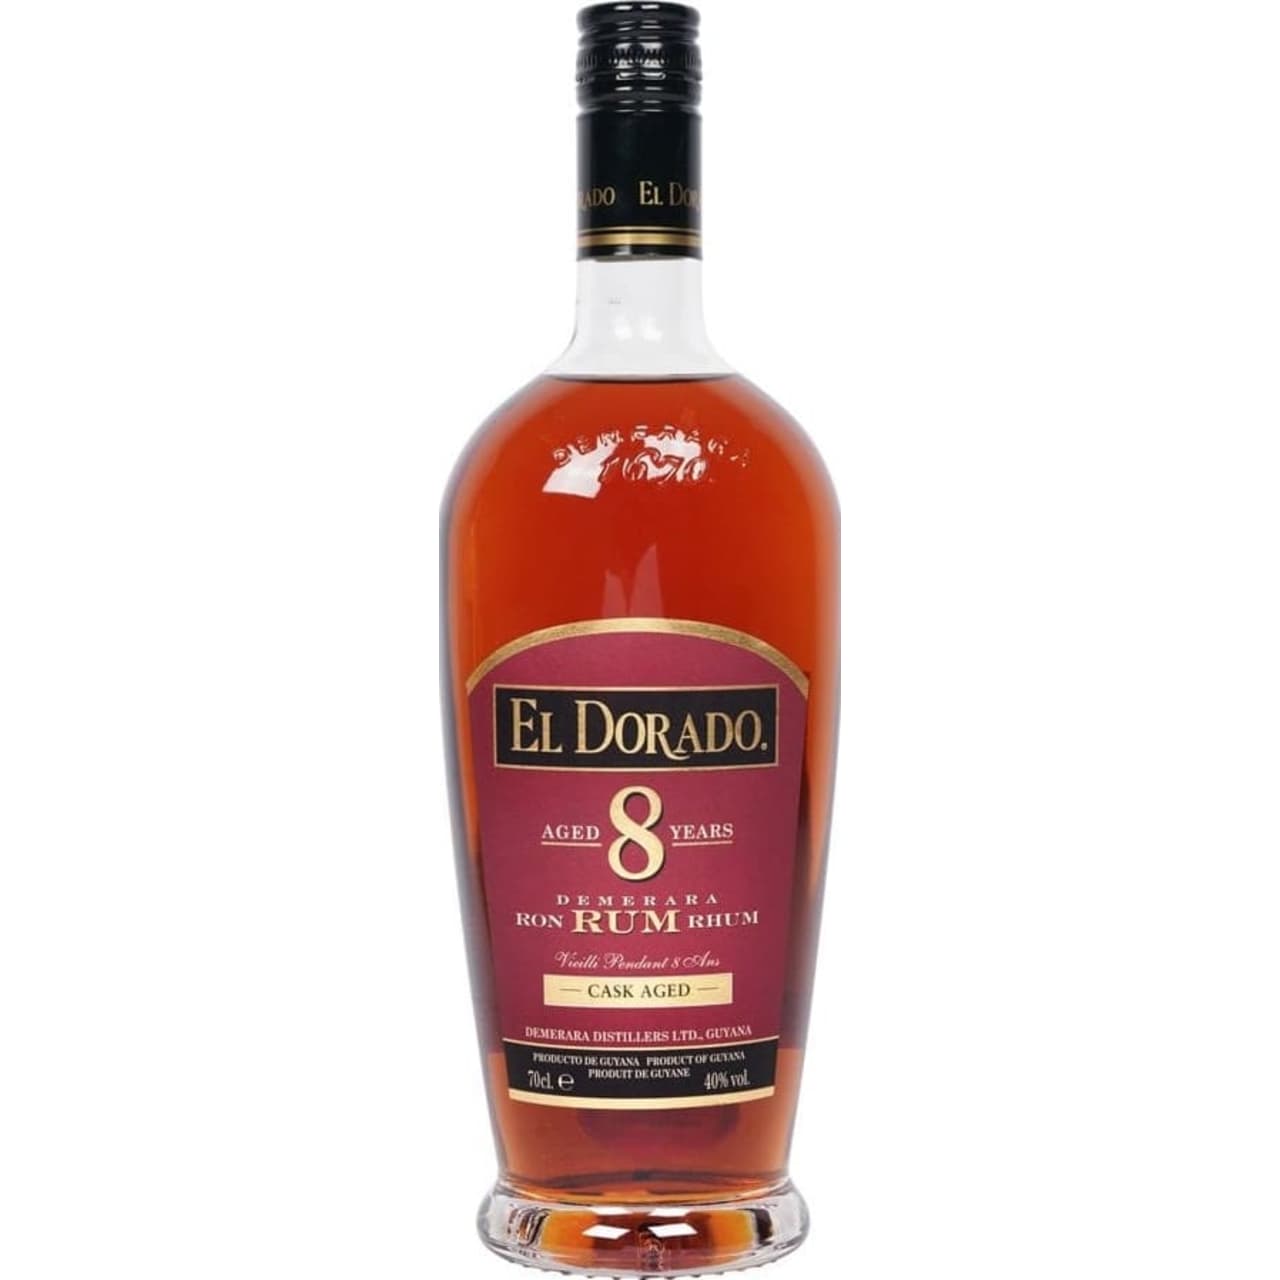 El Dorado 8 Year Old Rum is a complex fusion of a full flavoured, heavy bodied rum with light-to-medium bodied rums aged in bourbon oak casks, creating a sumptuous smooth sipping rum.